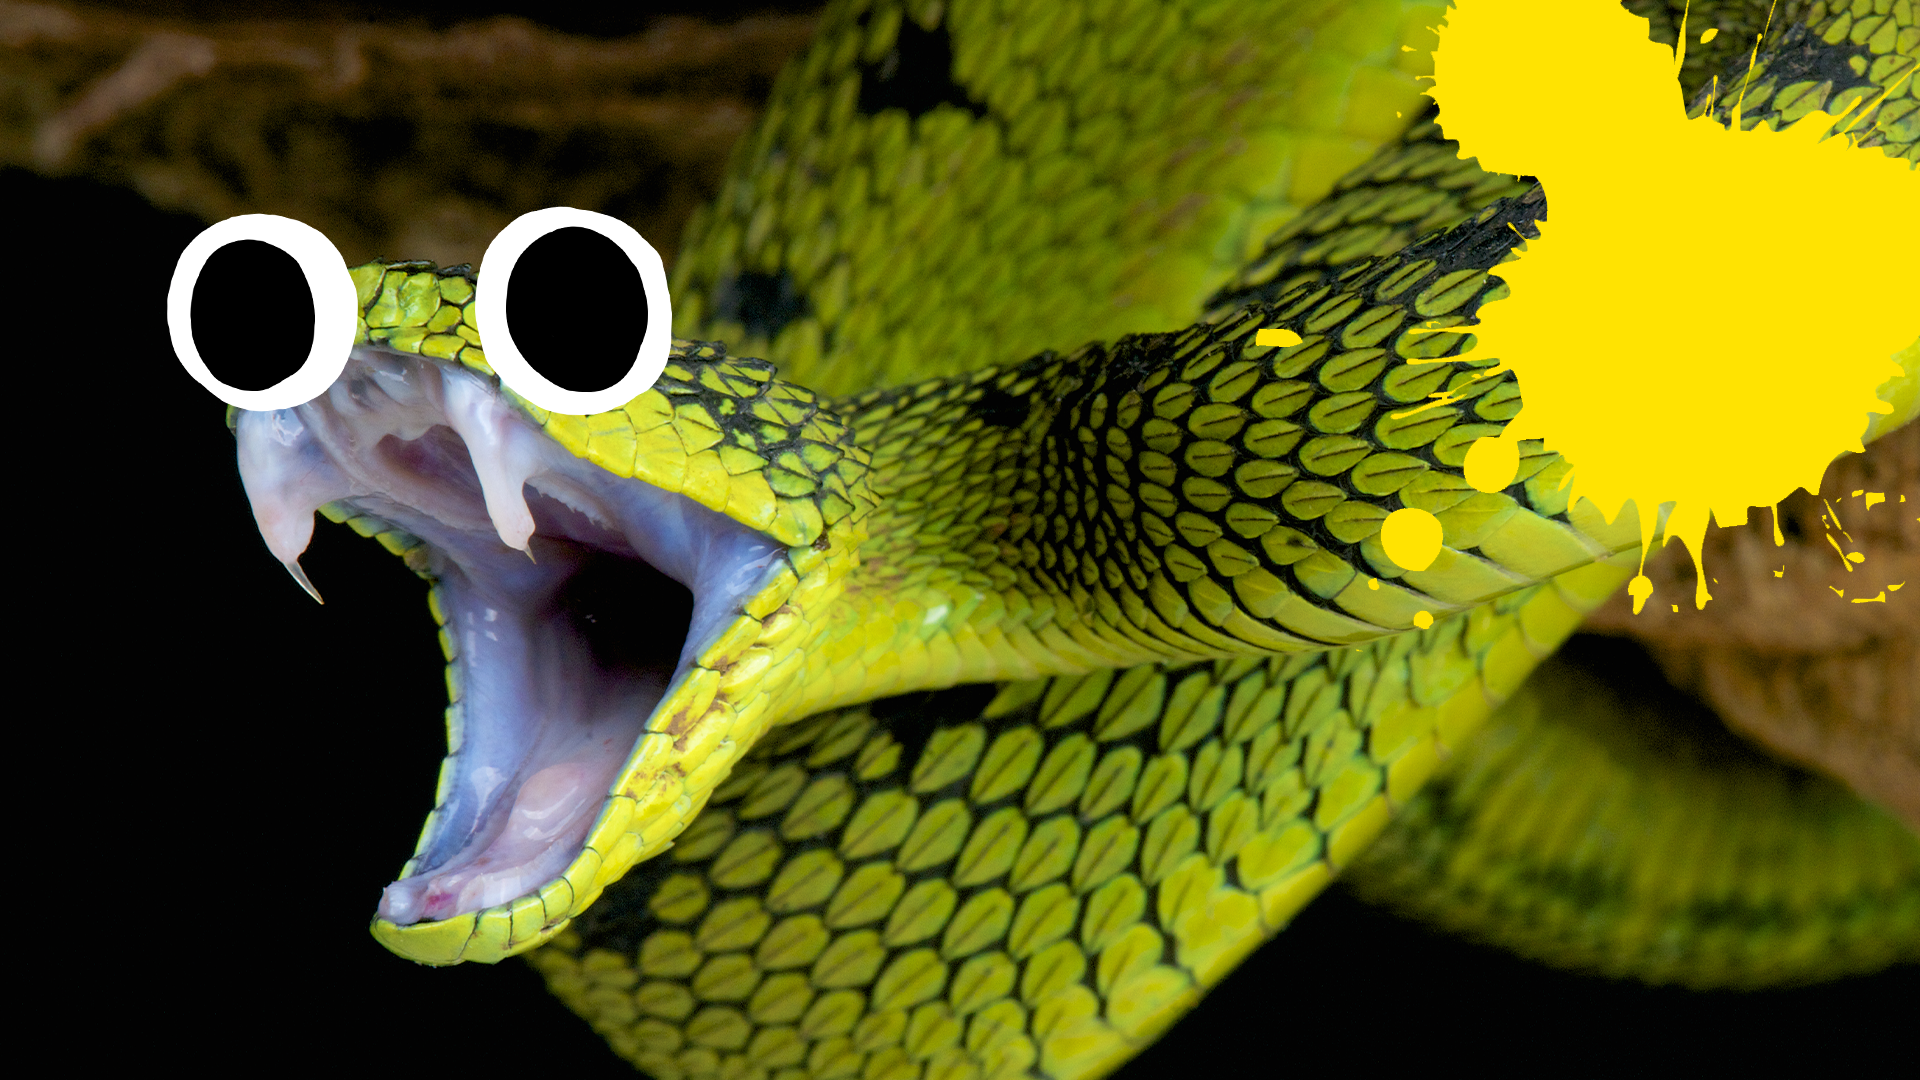 Snake with goggly eyes